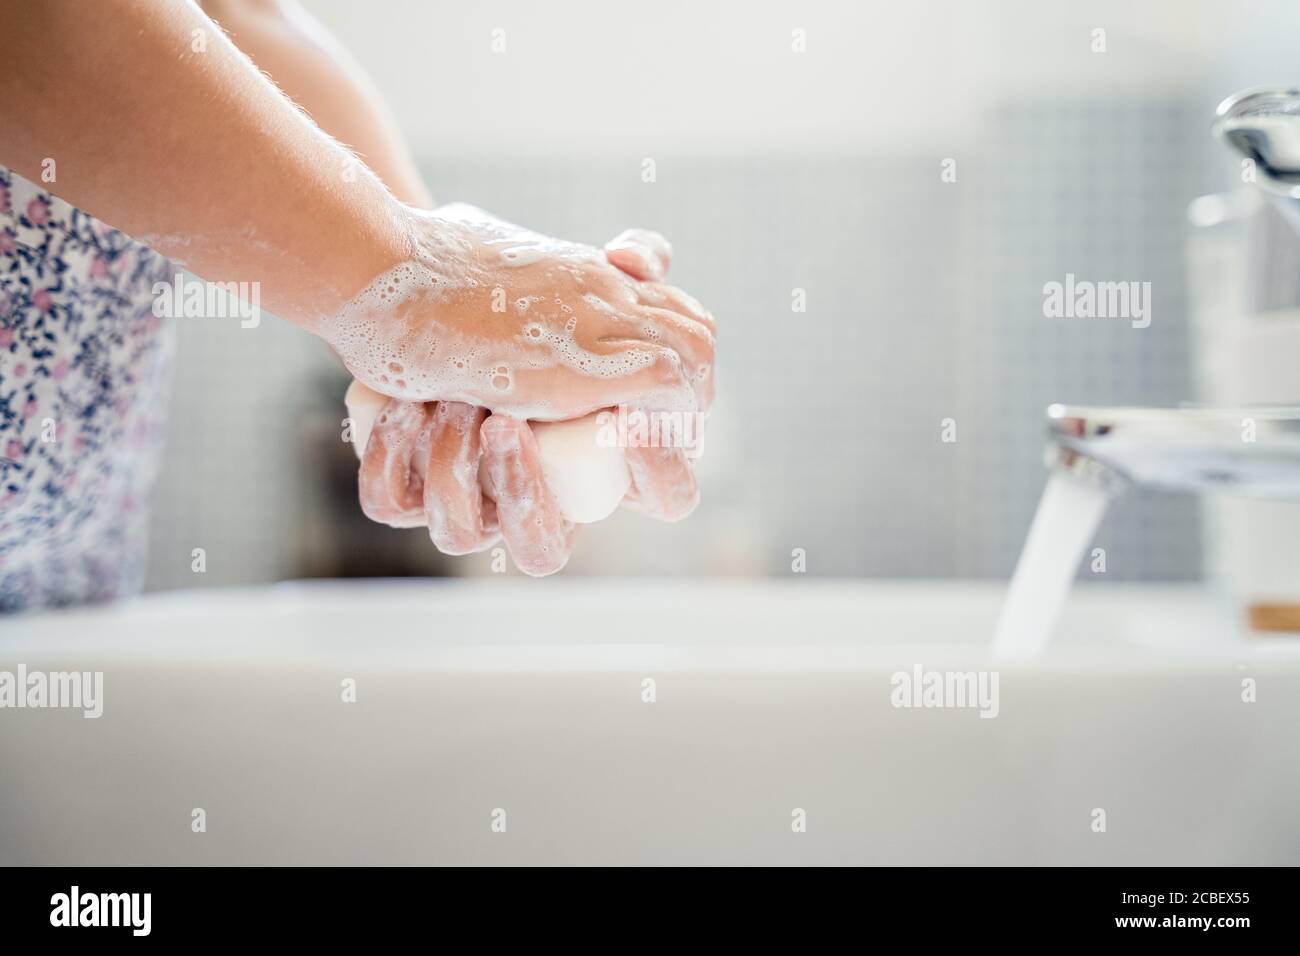 Little girl washes hands with bar of soap in washbasin under running tap water. Close up, detail Stock Photo